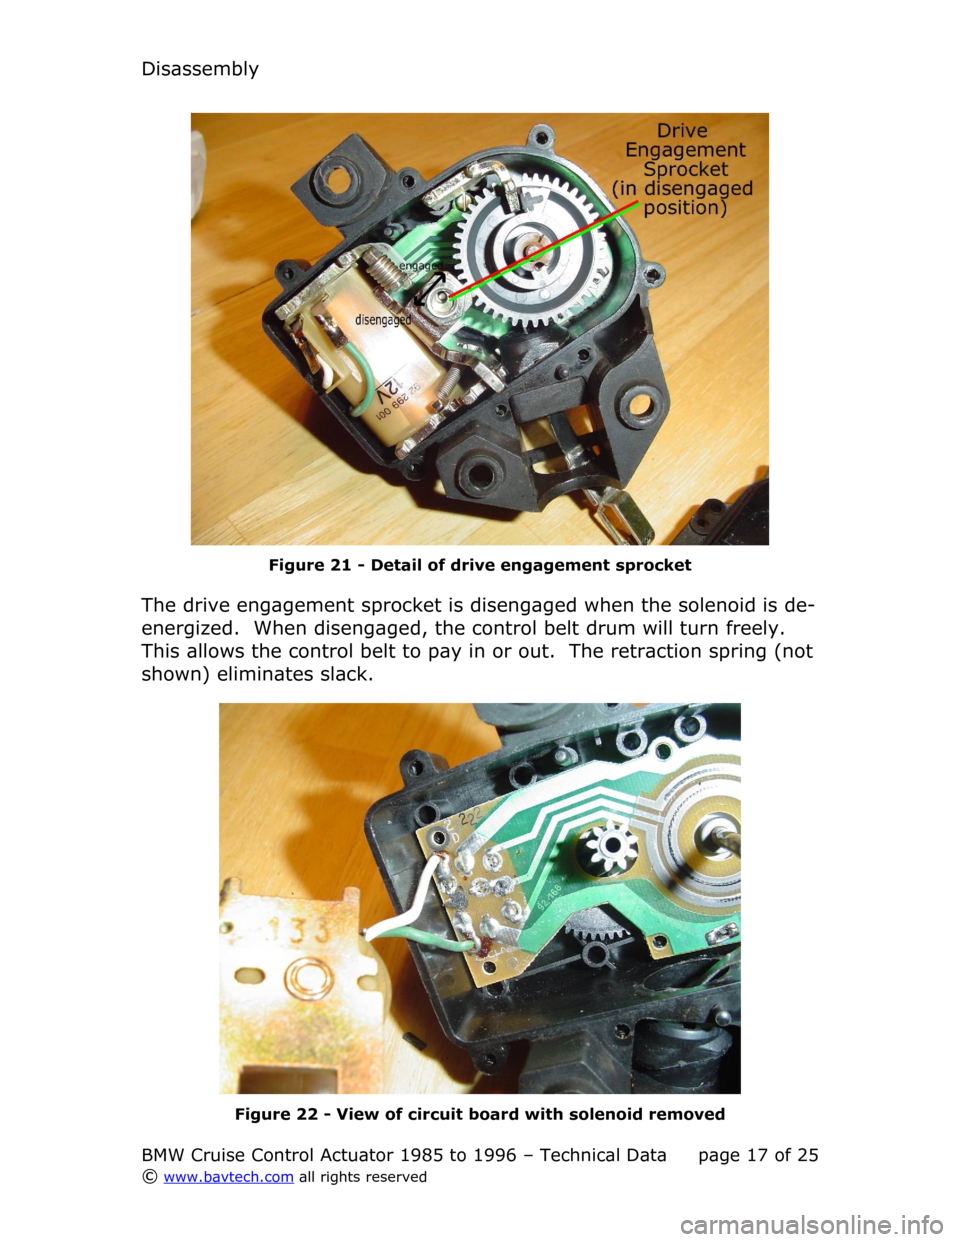 BMW 3 SERIES 1991 E36 Cruise Control Acutator Disassembly
Figure  21  - Detail of drive engagement sprocket
The drive engagement sprocket is disengaged when the solenoid is de-
energized.  When disengaged, the control belt drum will turn freely. 